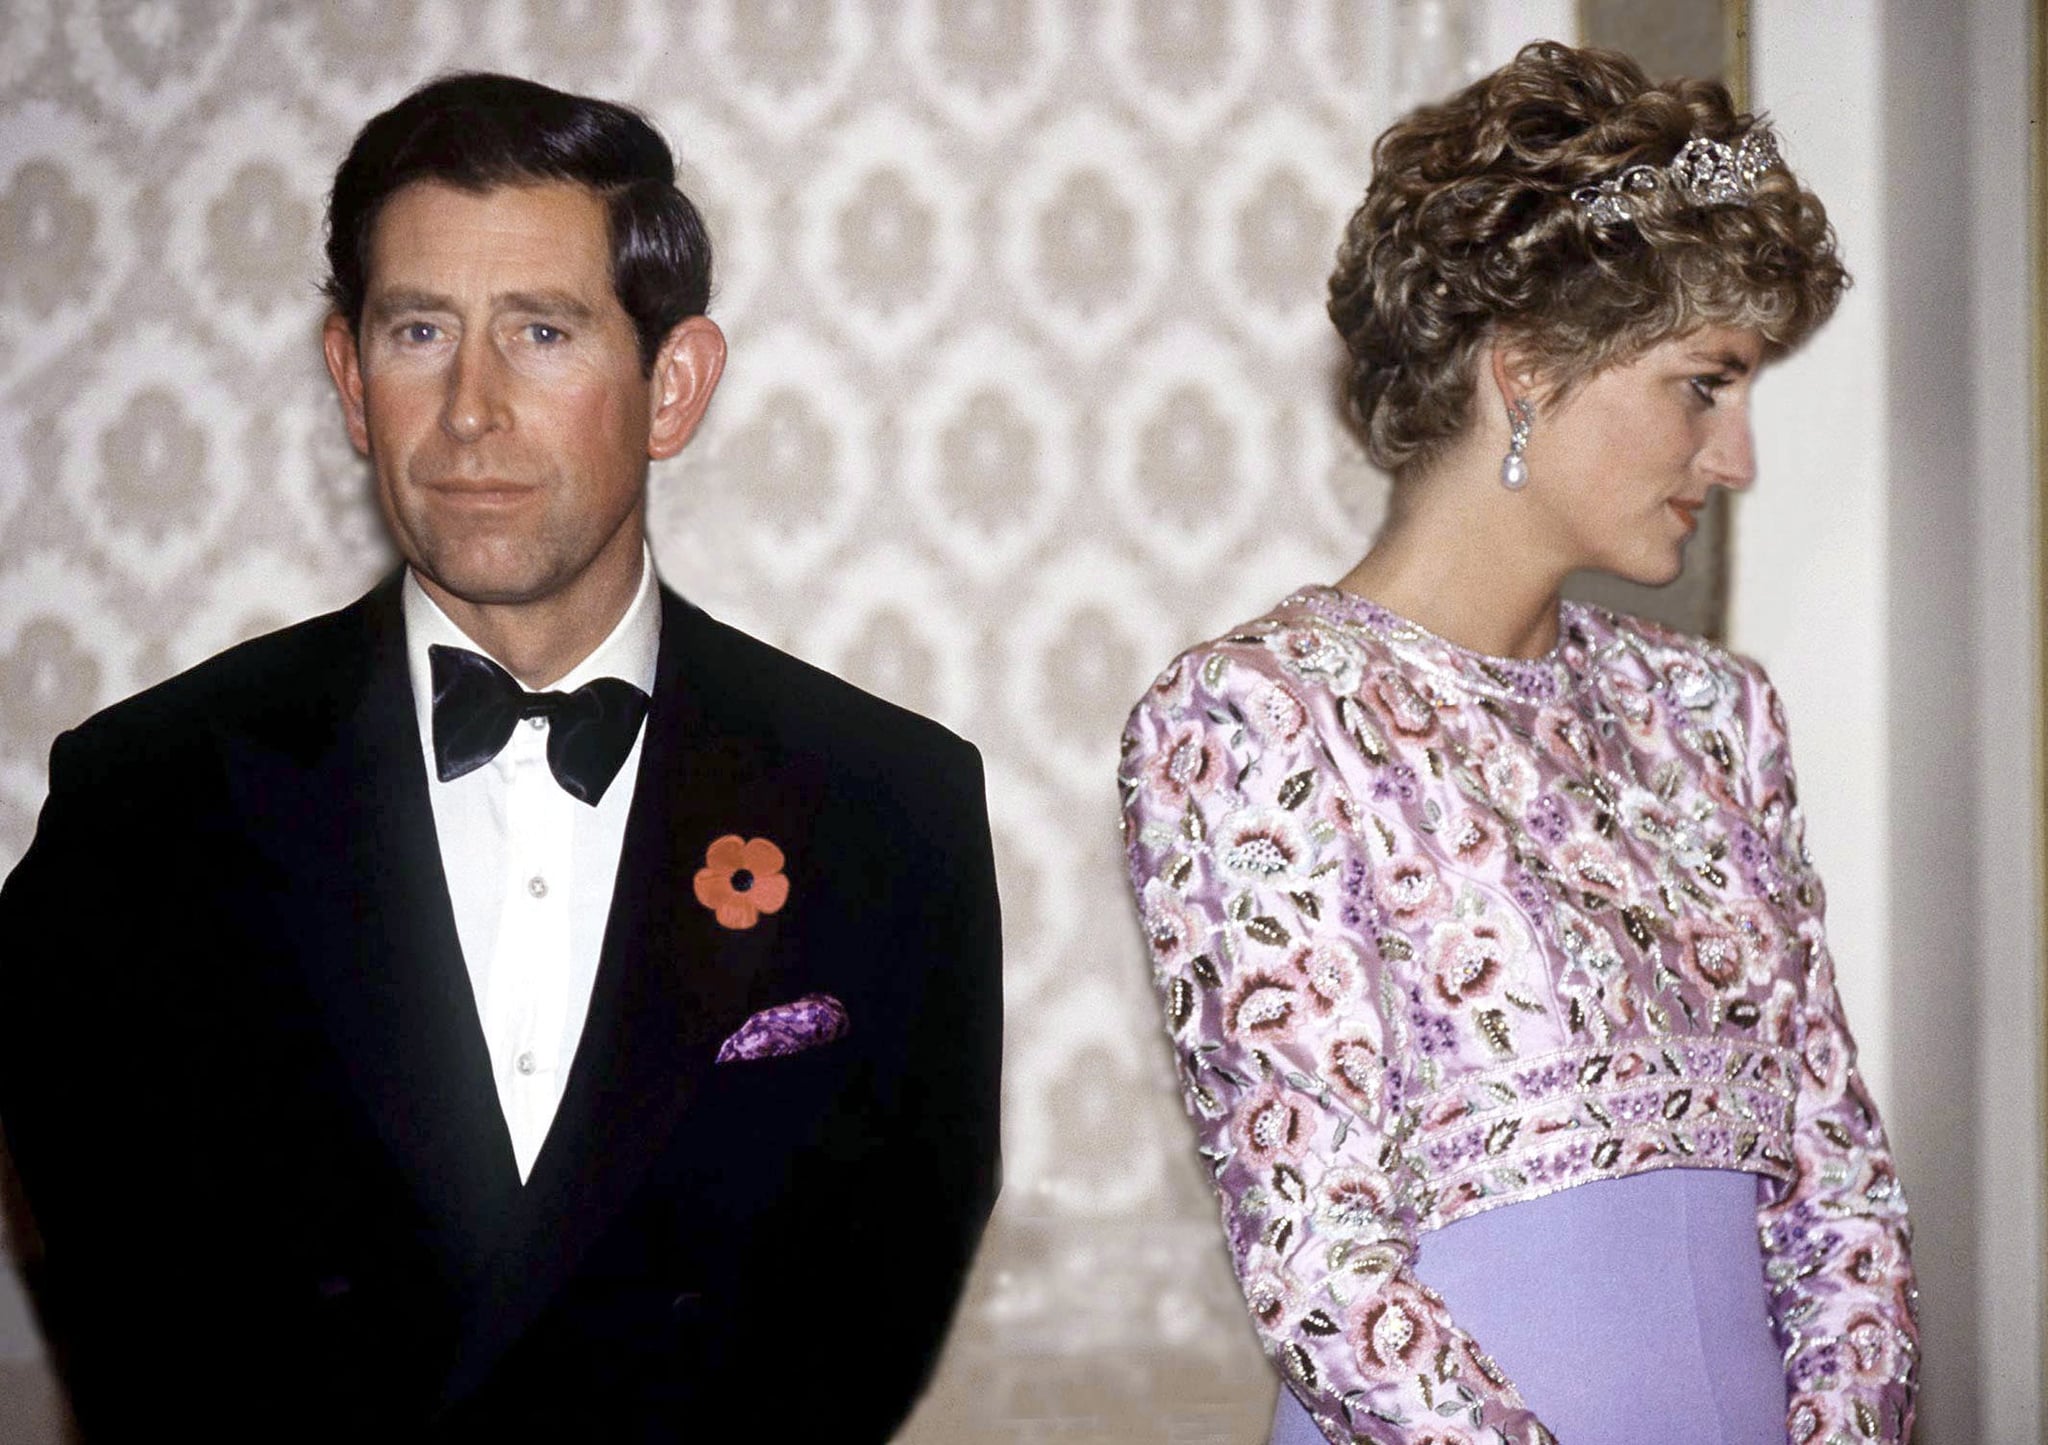 SOUTH KOREA - NOVEMBER 03:  Prince Charles And Princess Diana On Their Last Official Trip Together - A Visit To The Republic Of Korea (south Korea).they Are Attending A Presidential Banquet At The Blue House In Seoul  (Photo by Tim Graham Photo Library via Getty Images)